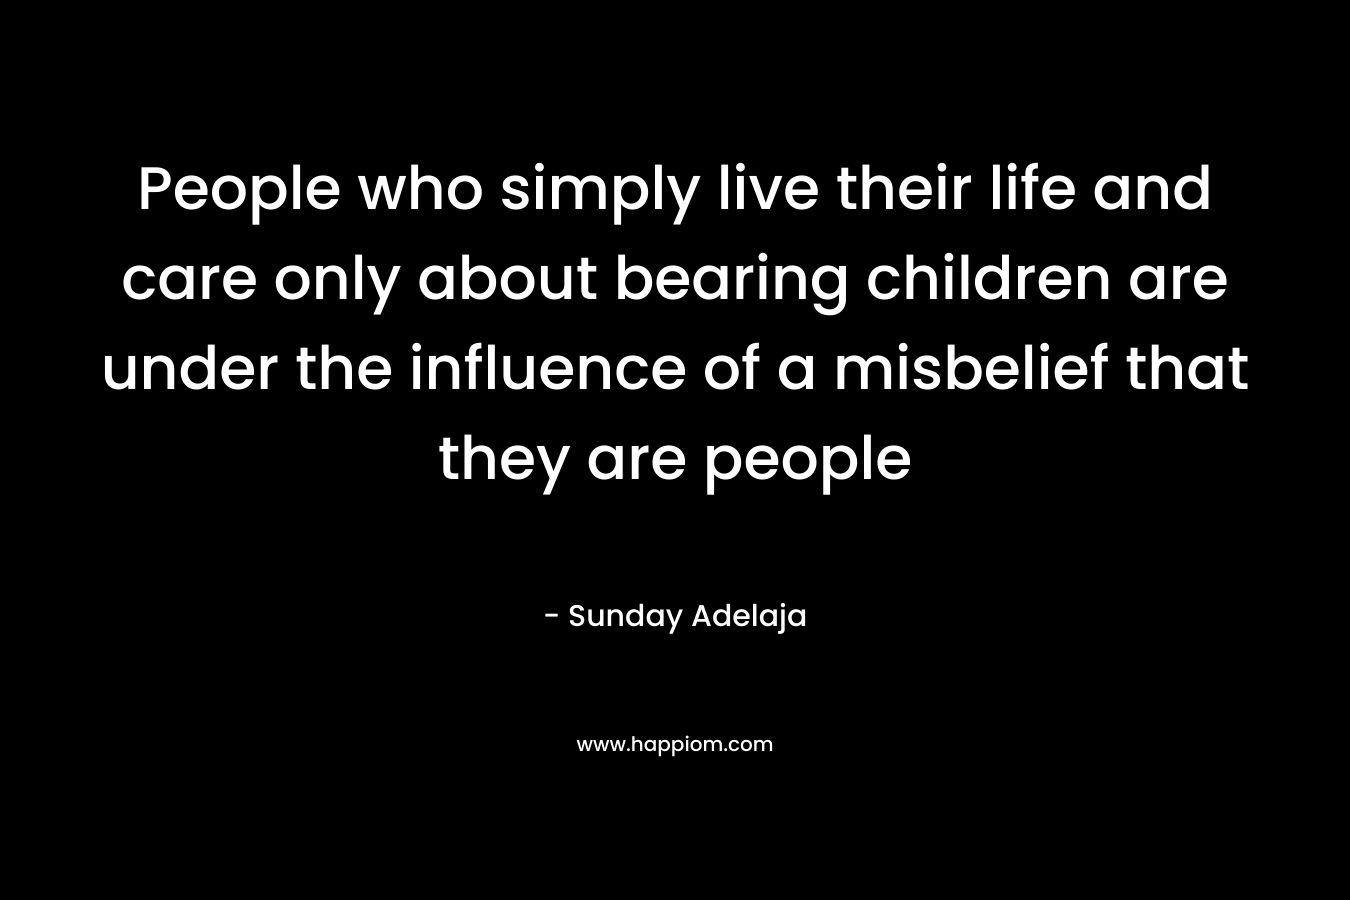 People who simply live their life and care only about bearing children are under the influence of a misbelief that they are people